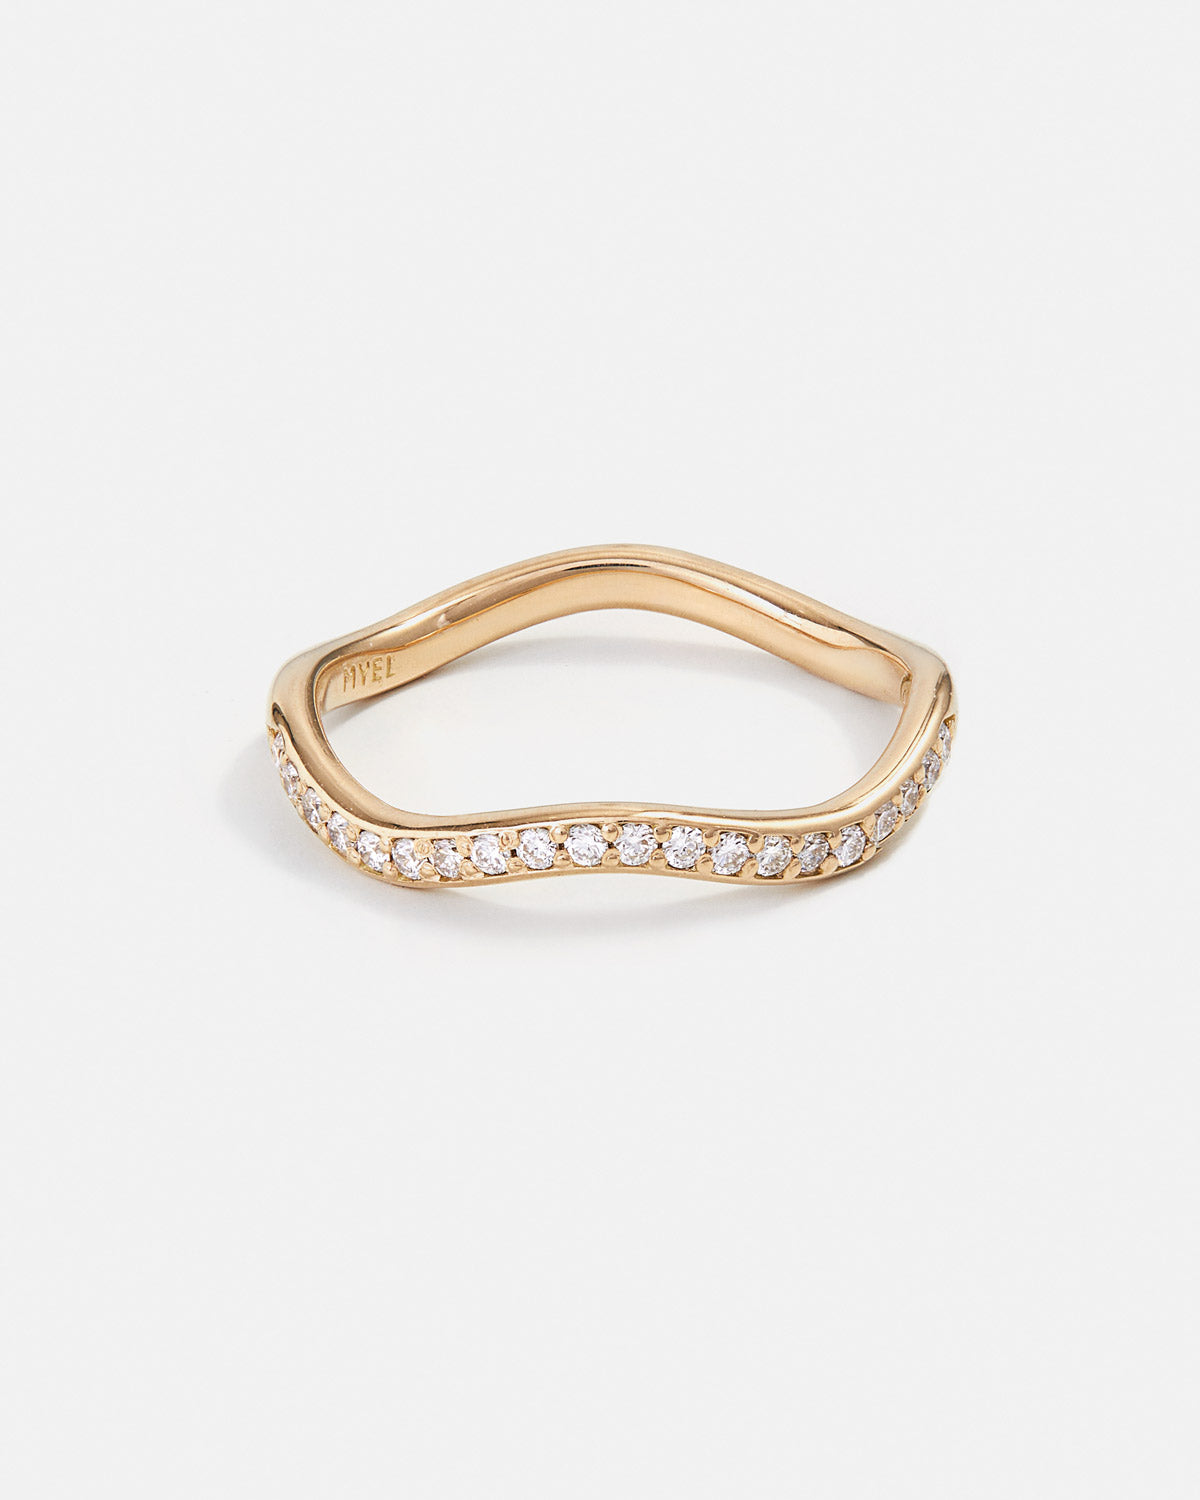 Custom Ring - Pavé Wave Ring in 14K Fairmined Gold with Lab-grown Diamonds